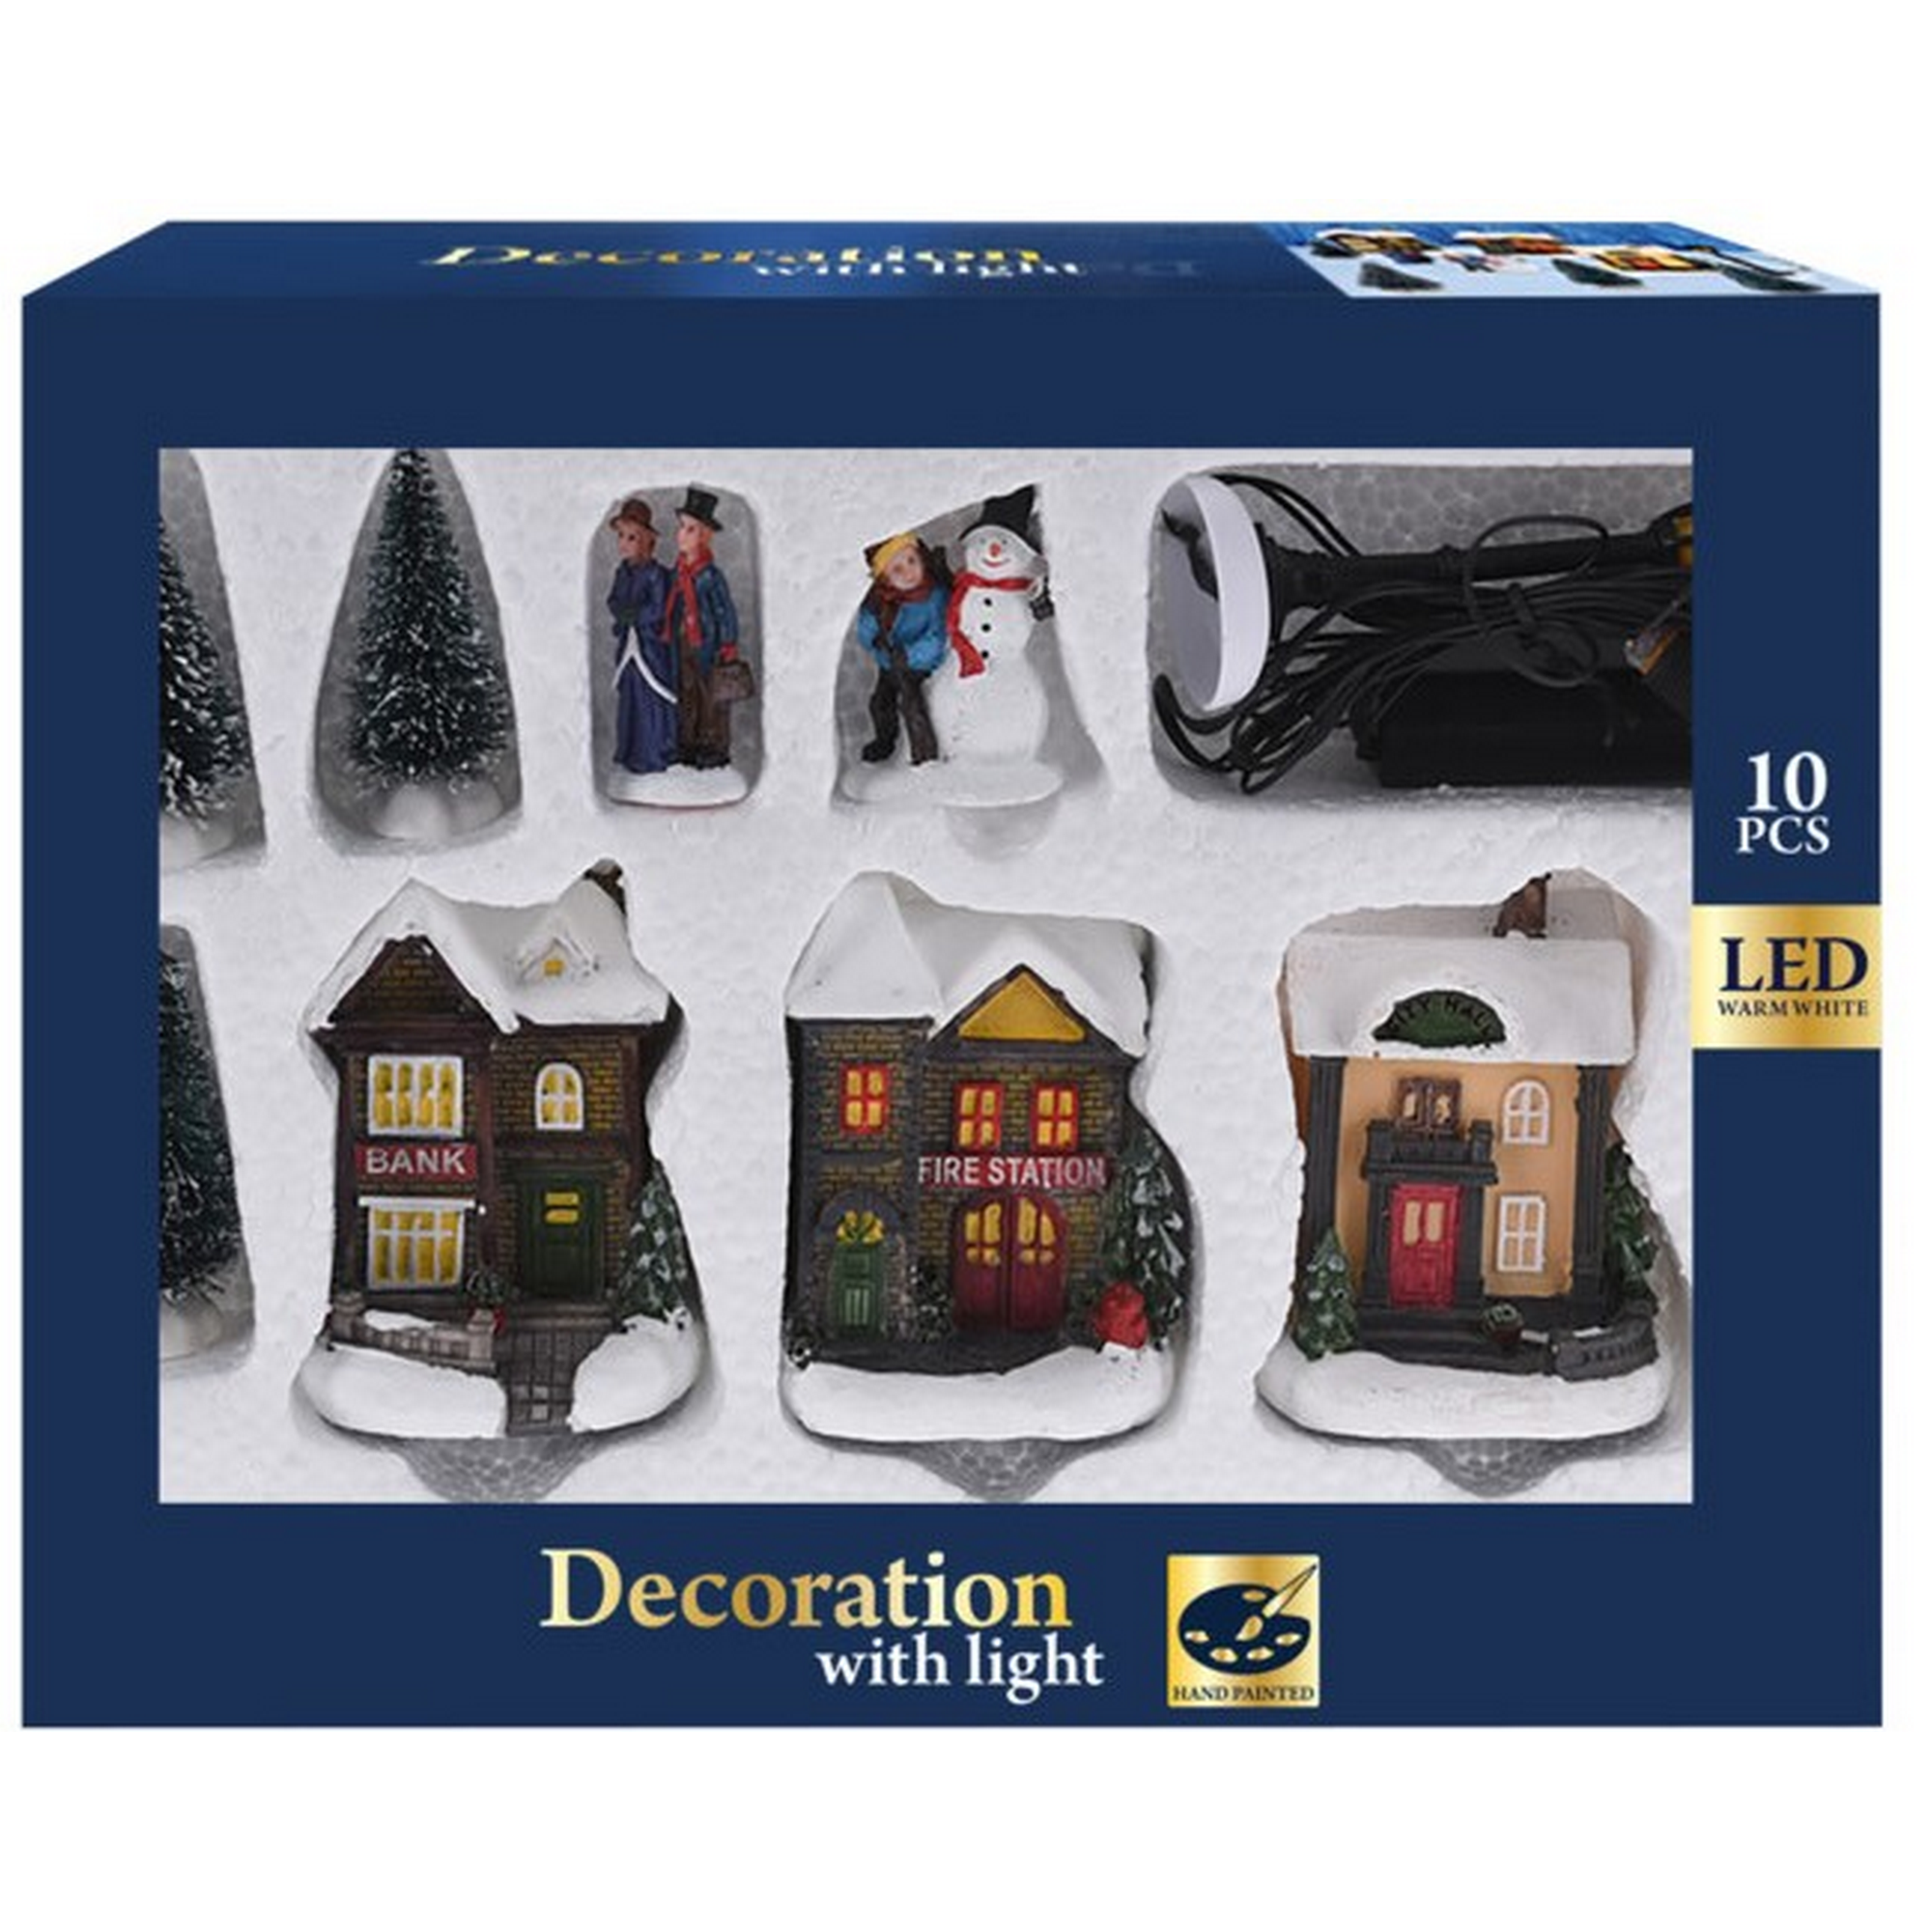 Weihnachtsdorf mit LED-Beleuchtung, 10-tlg. + product picture